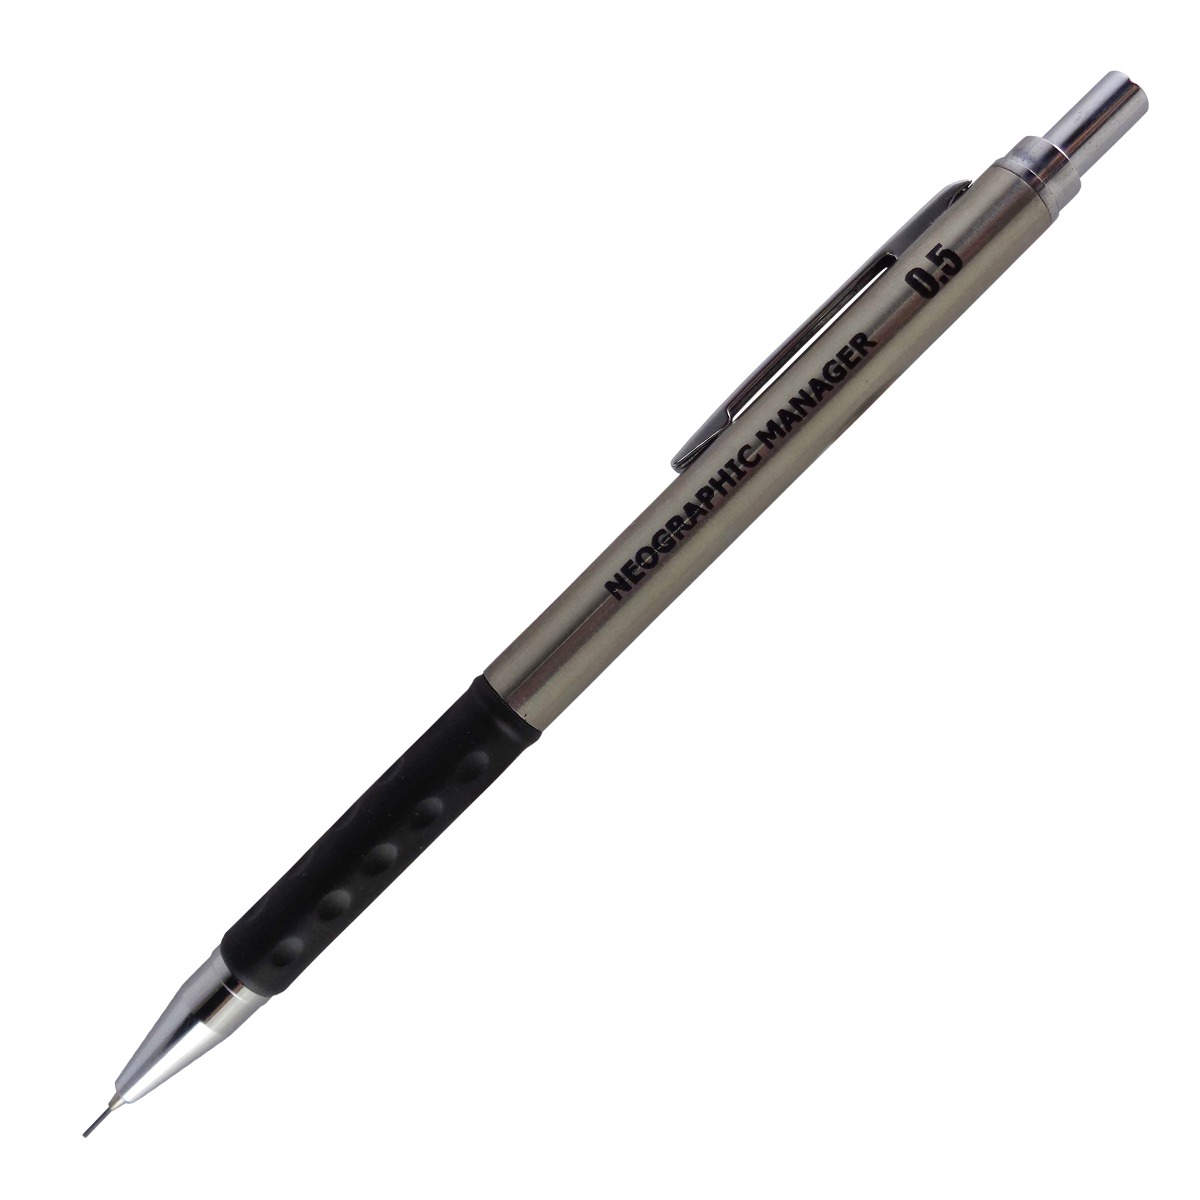 K-Nine Model: 15201 Neographic Silver color body with Black grip silver clip 0.5mm tip mechanical pencil